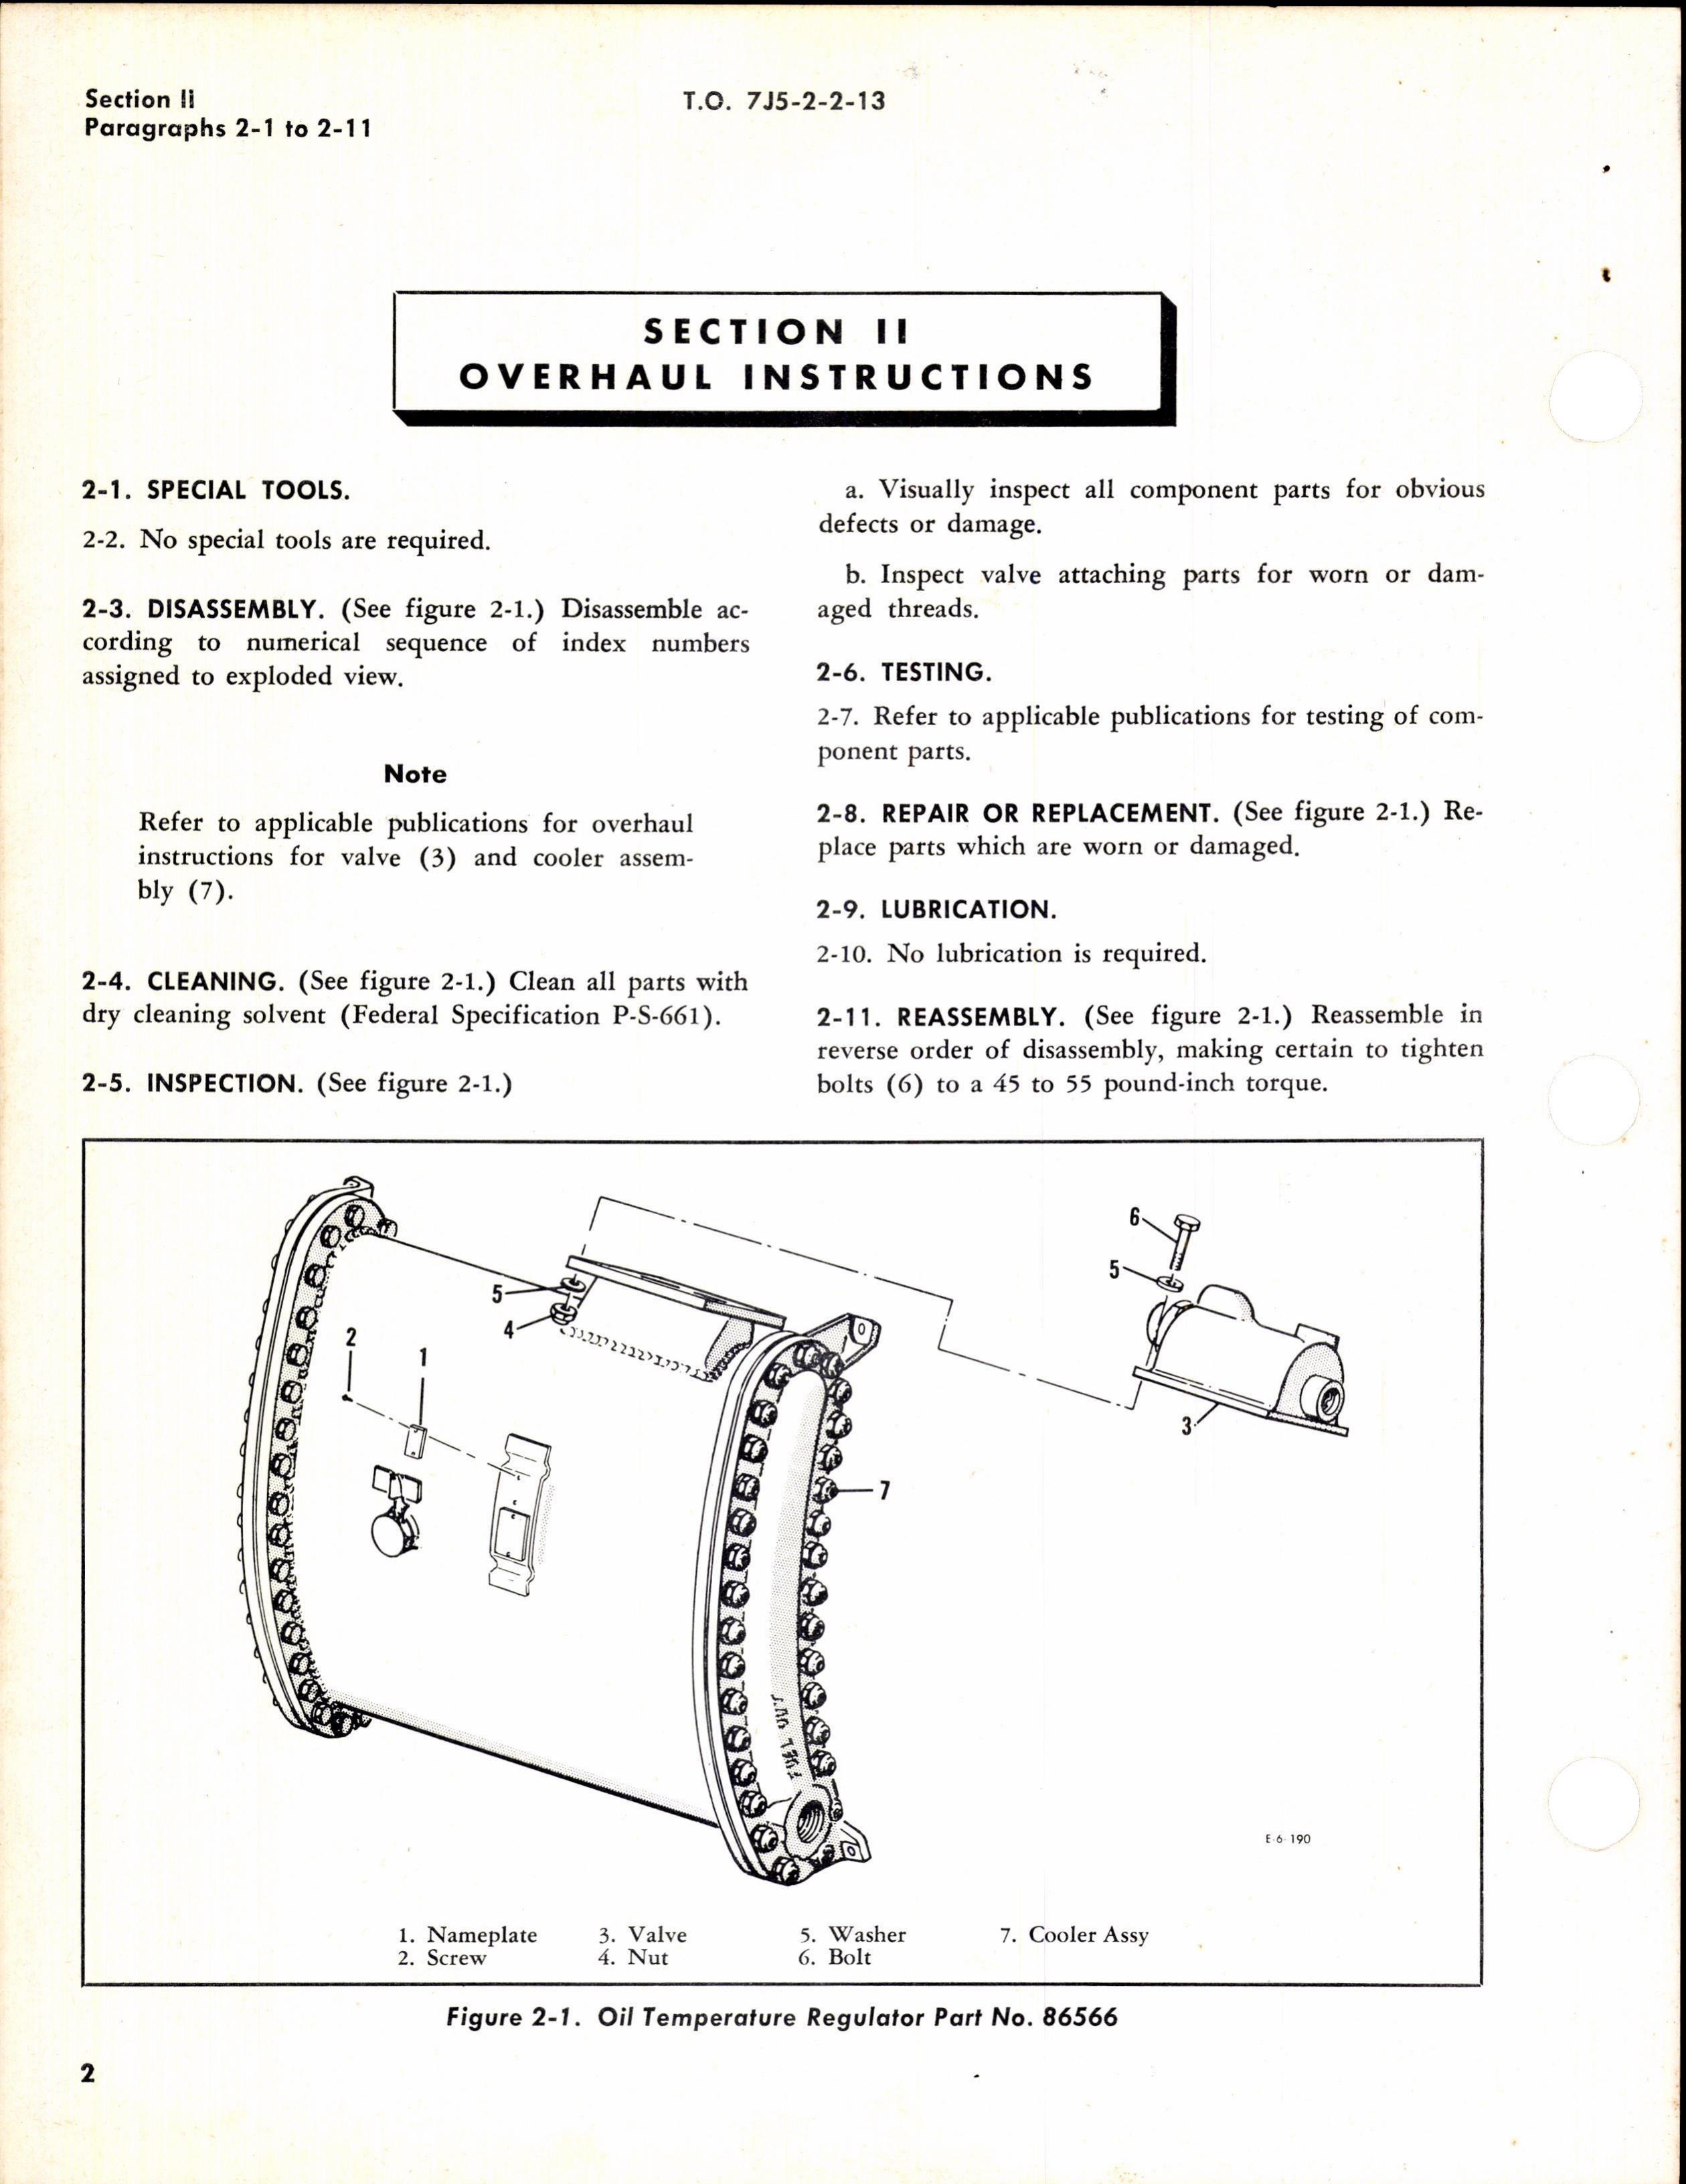 Sample page 4 from AirCorps Library document: Overhaul Instructions for Airesearch Oil Temperature Regulators & Heat Exchanger